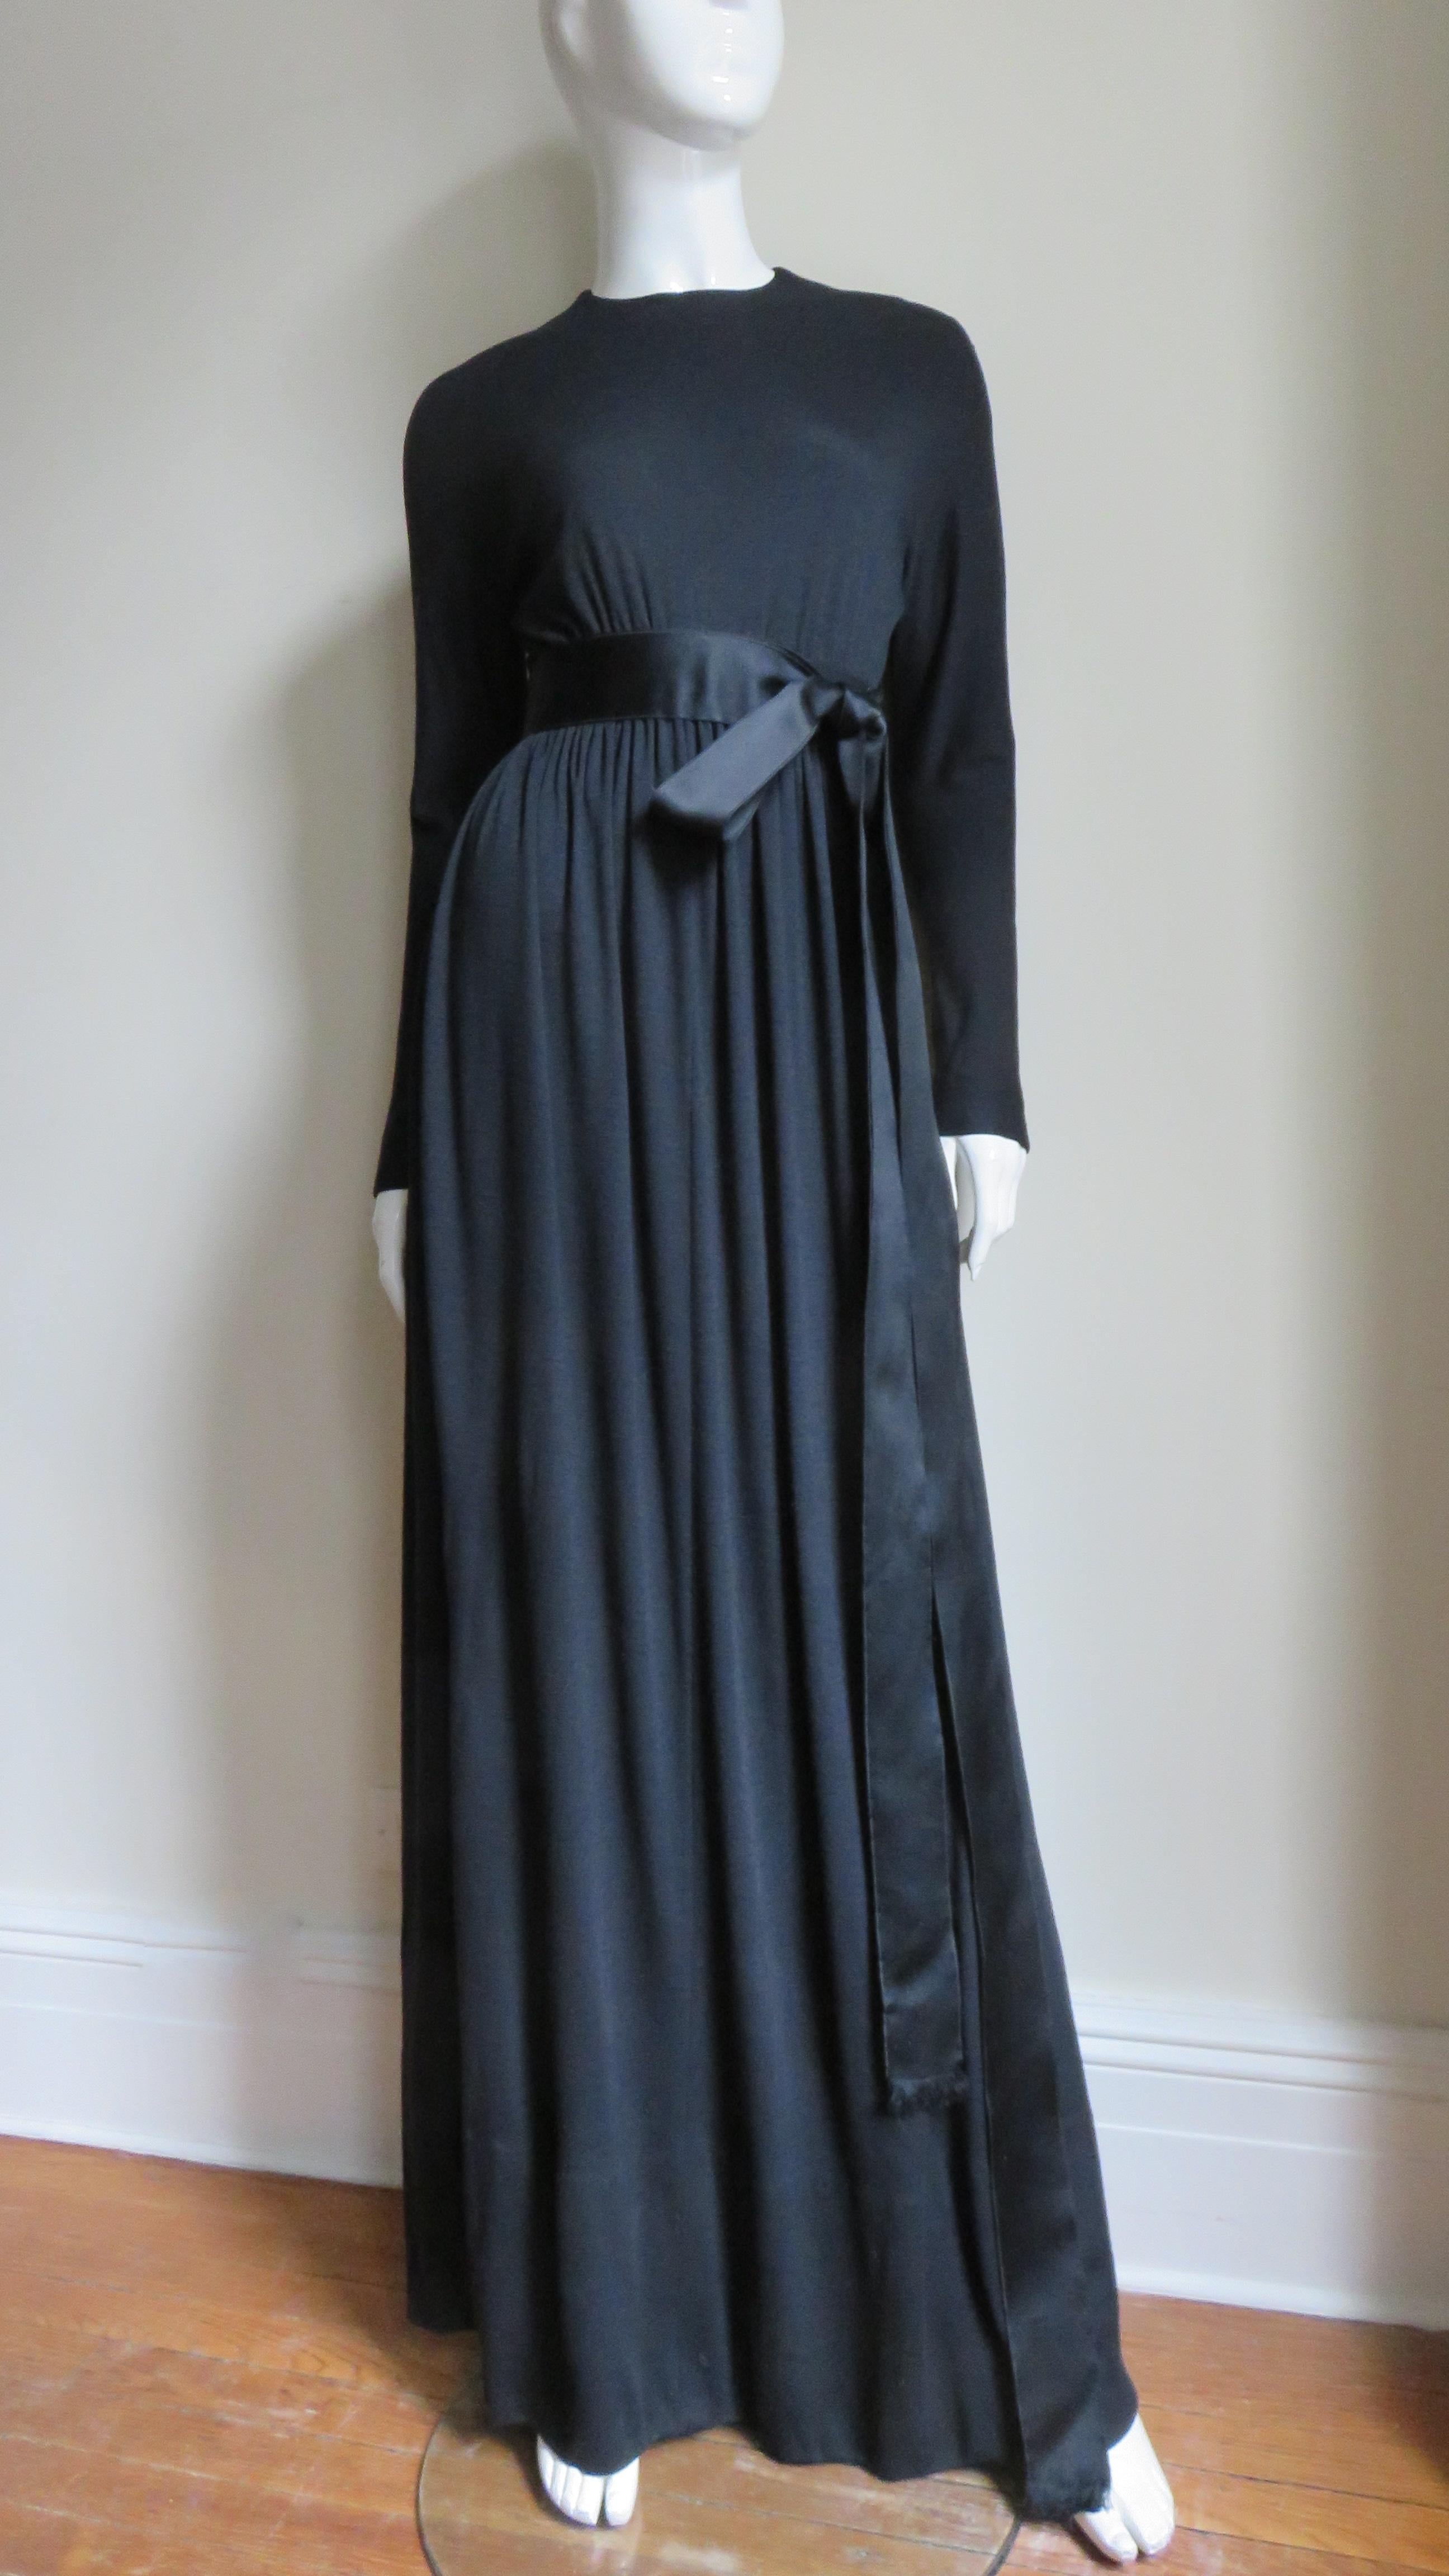 A gorgeous fine black wool jersey maxi dress gown by master designer Norman Norell.  It has a crew neckline, dolman sleeves with zipper wrists and a silk satin ribbon belt adorning the high waist onto which a fuller skirt is gathered.  It still has